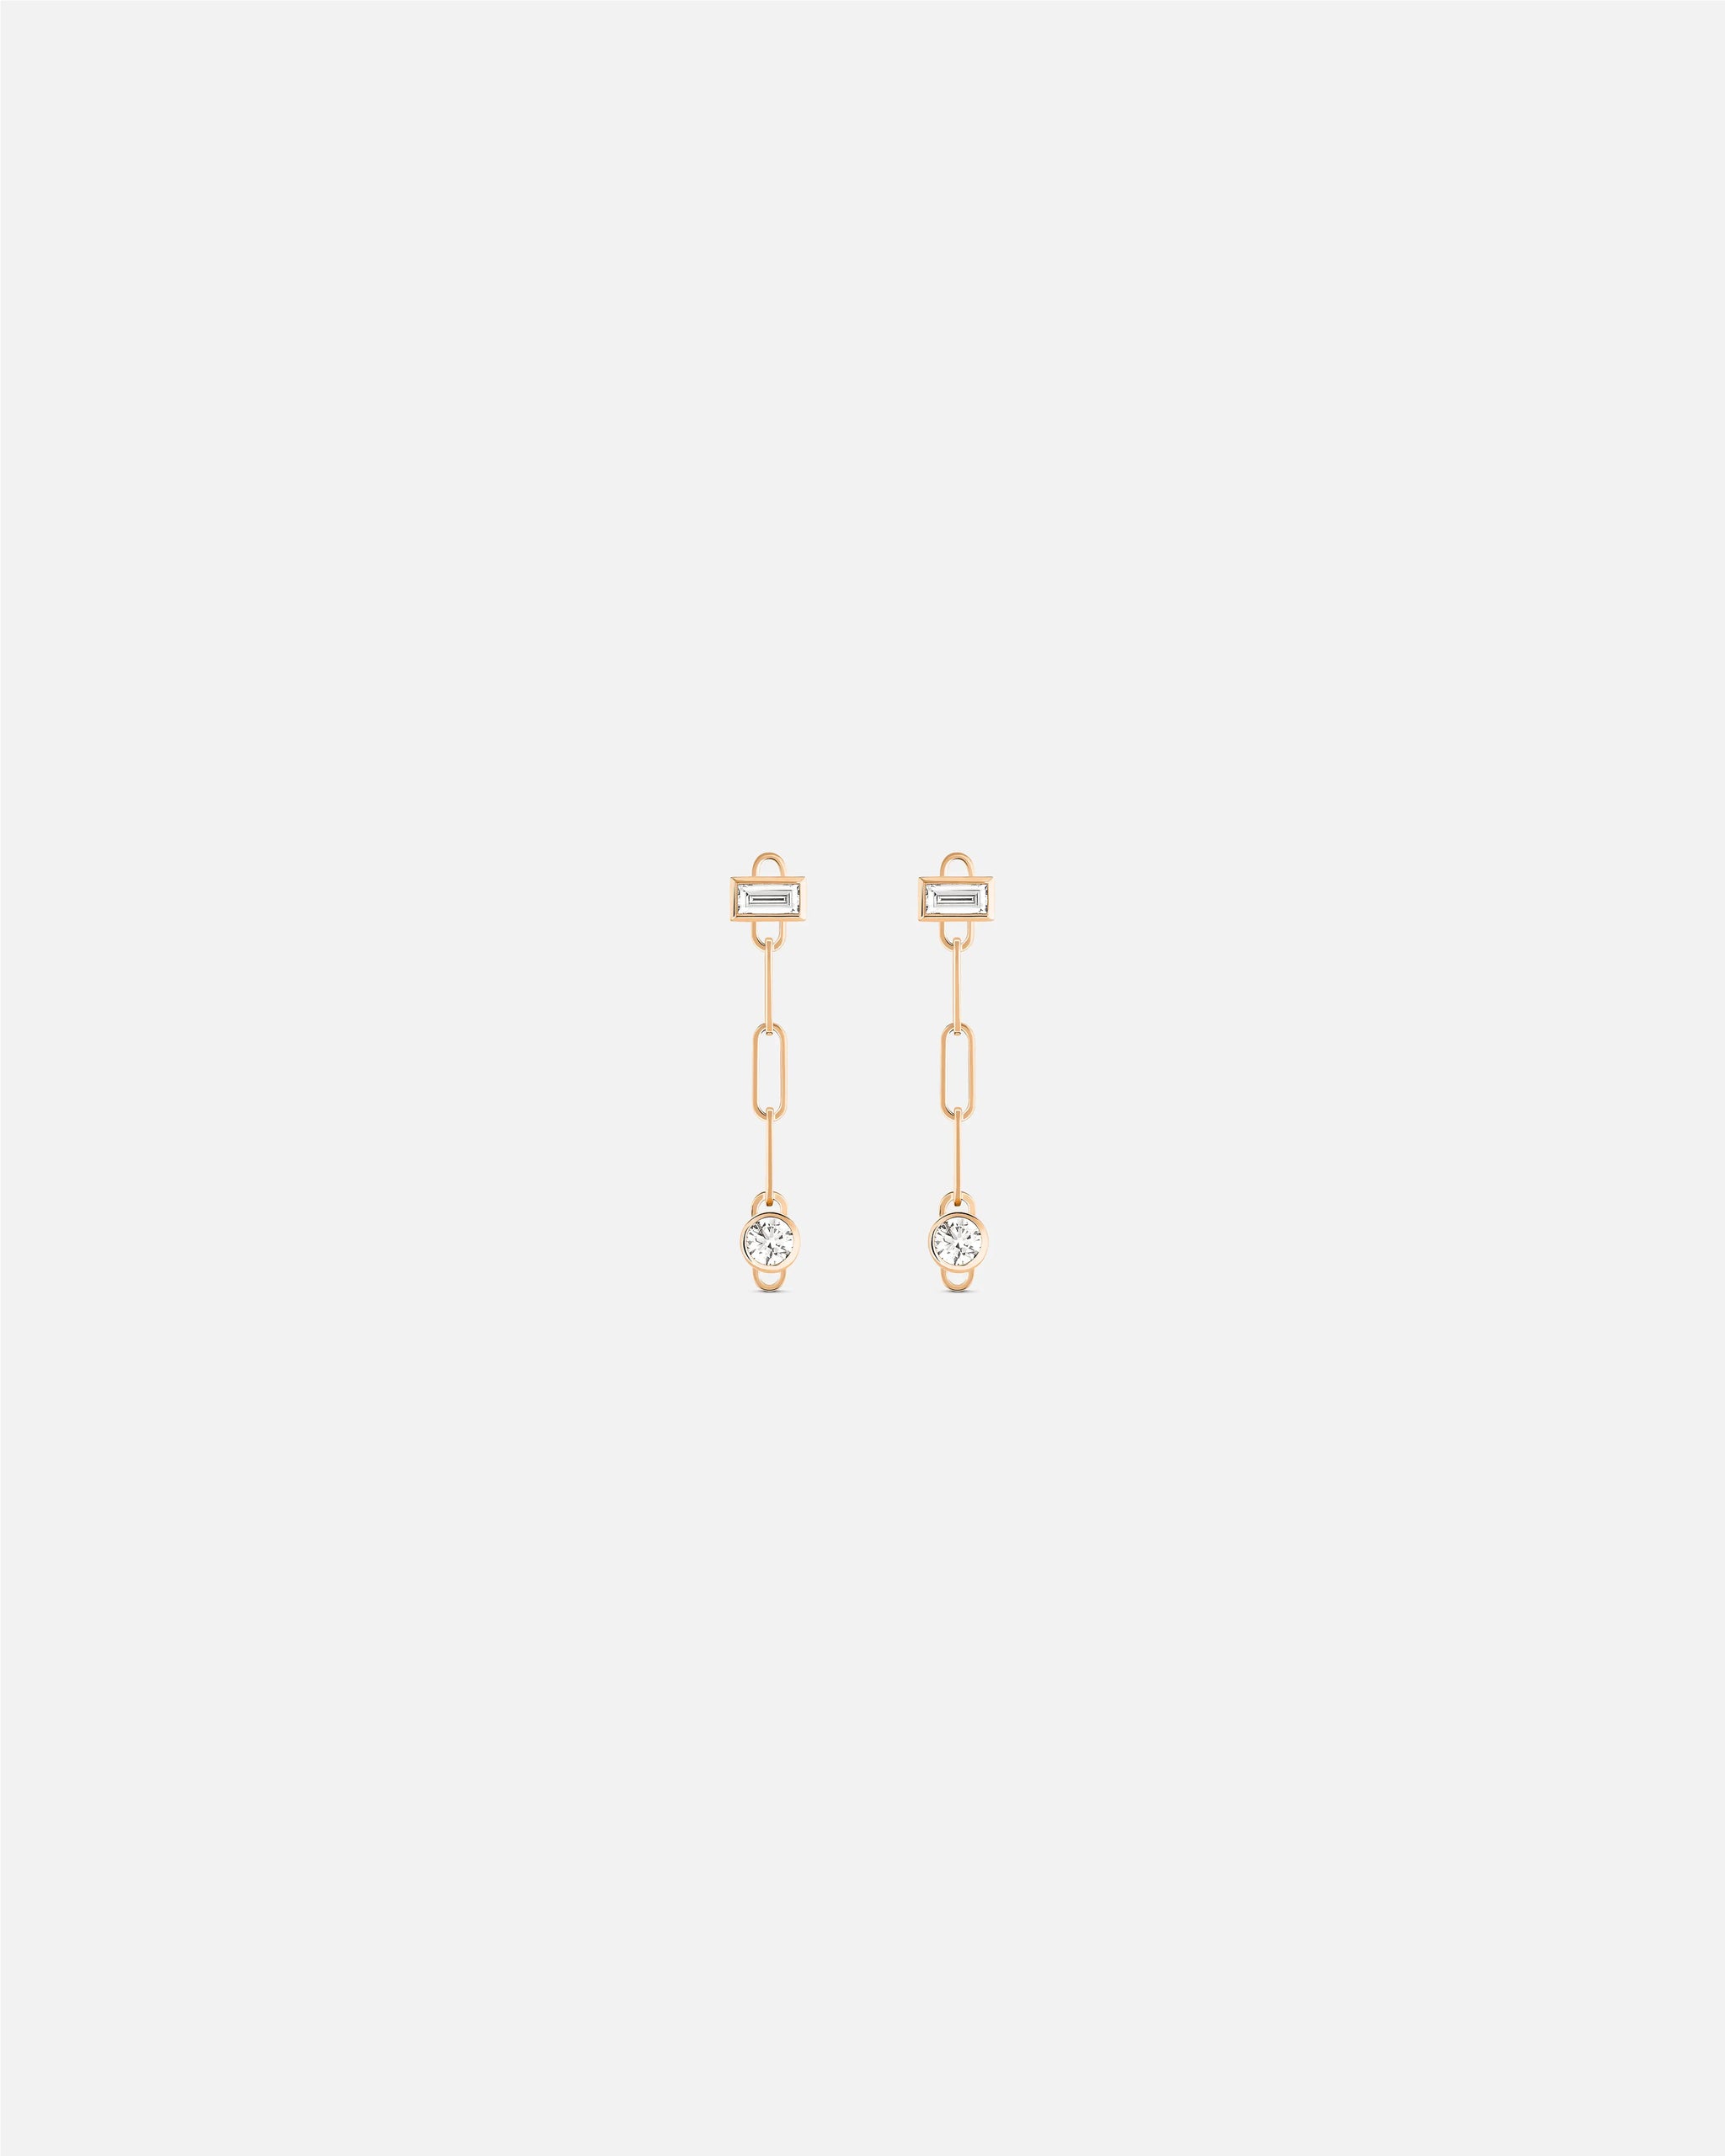 Baguette Round PM Classics Earrings in Rose Gold - 1 - Nouvel Heritage